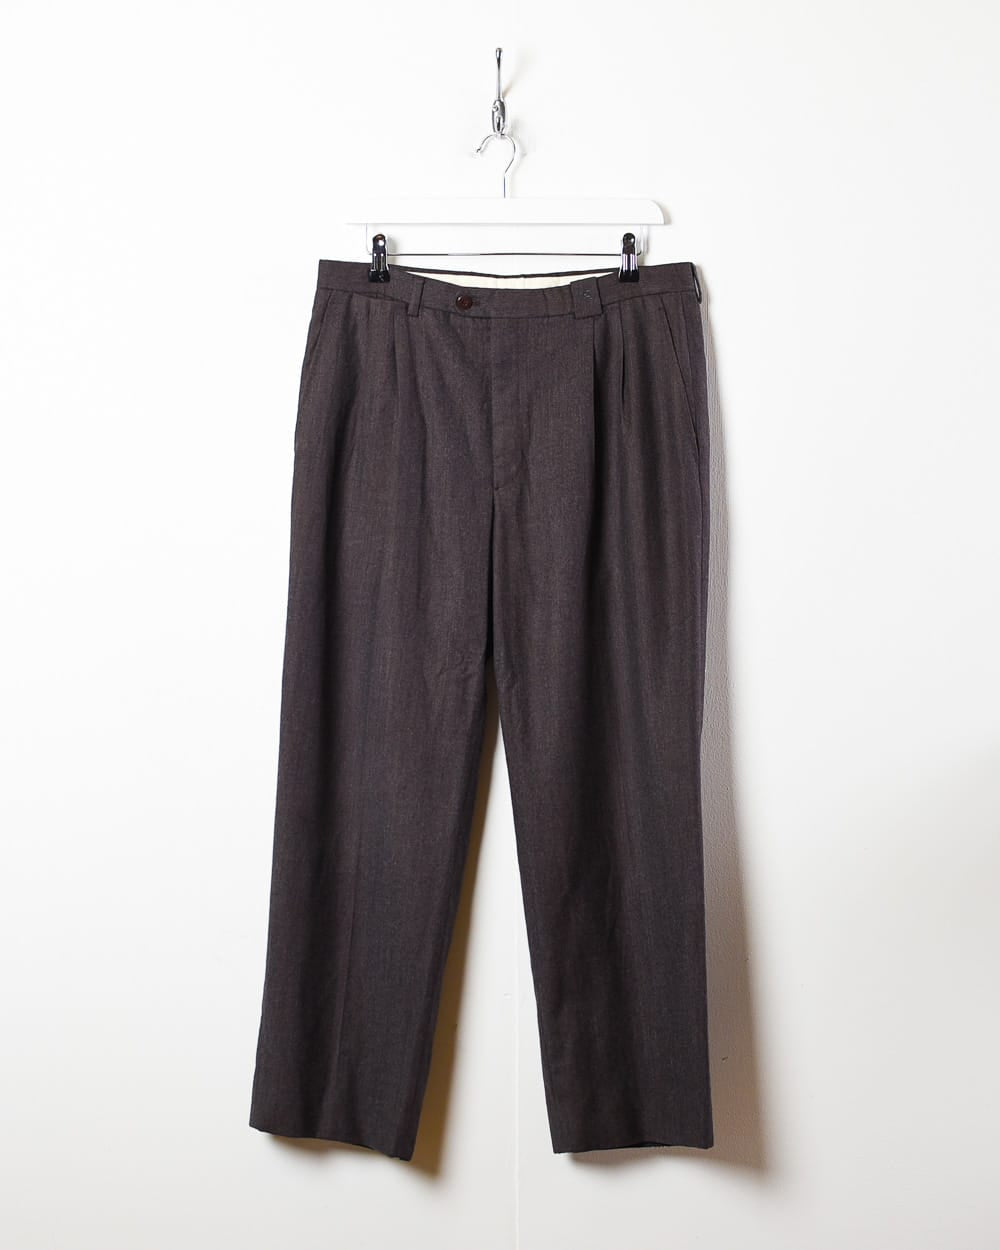 Brown Burberry Trousers - W34 L27